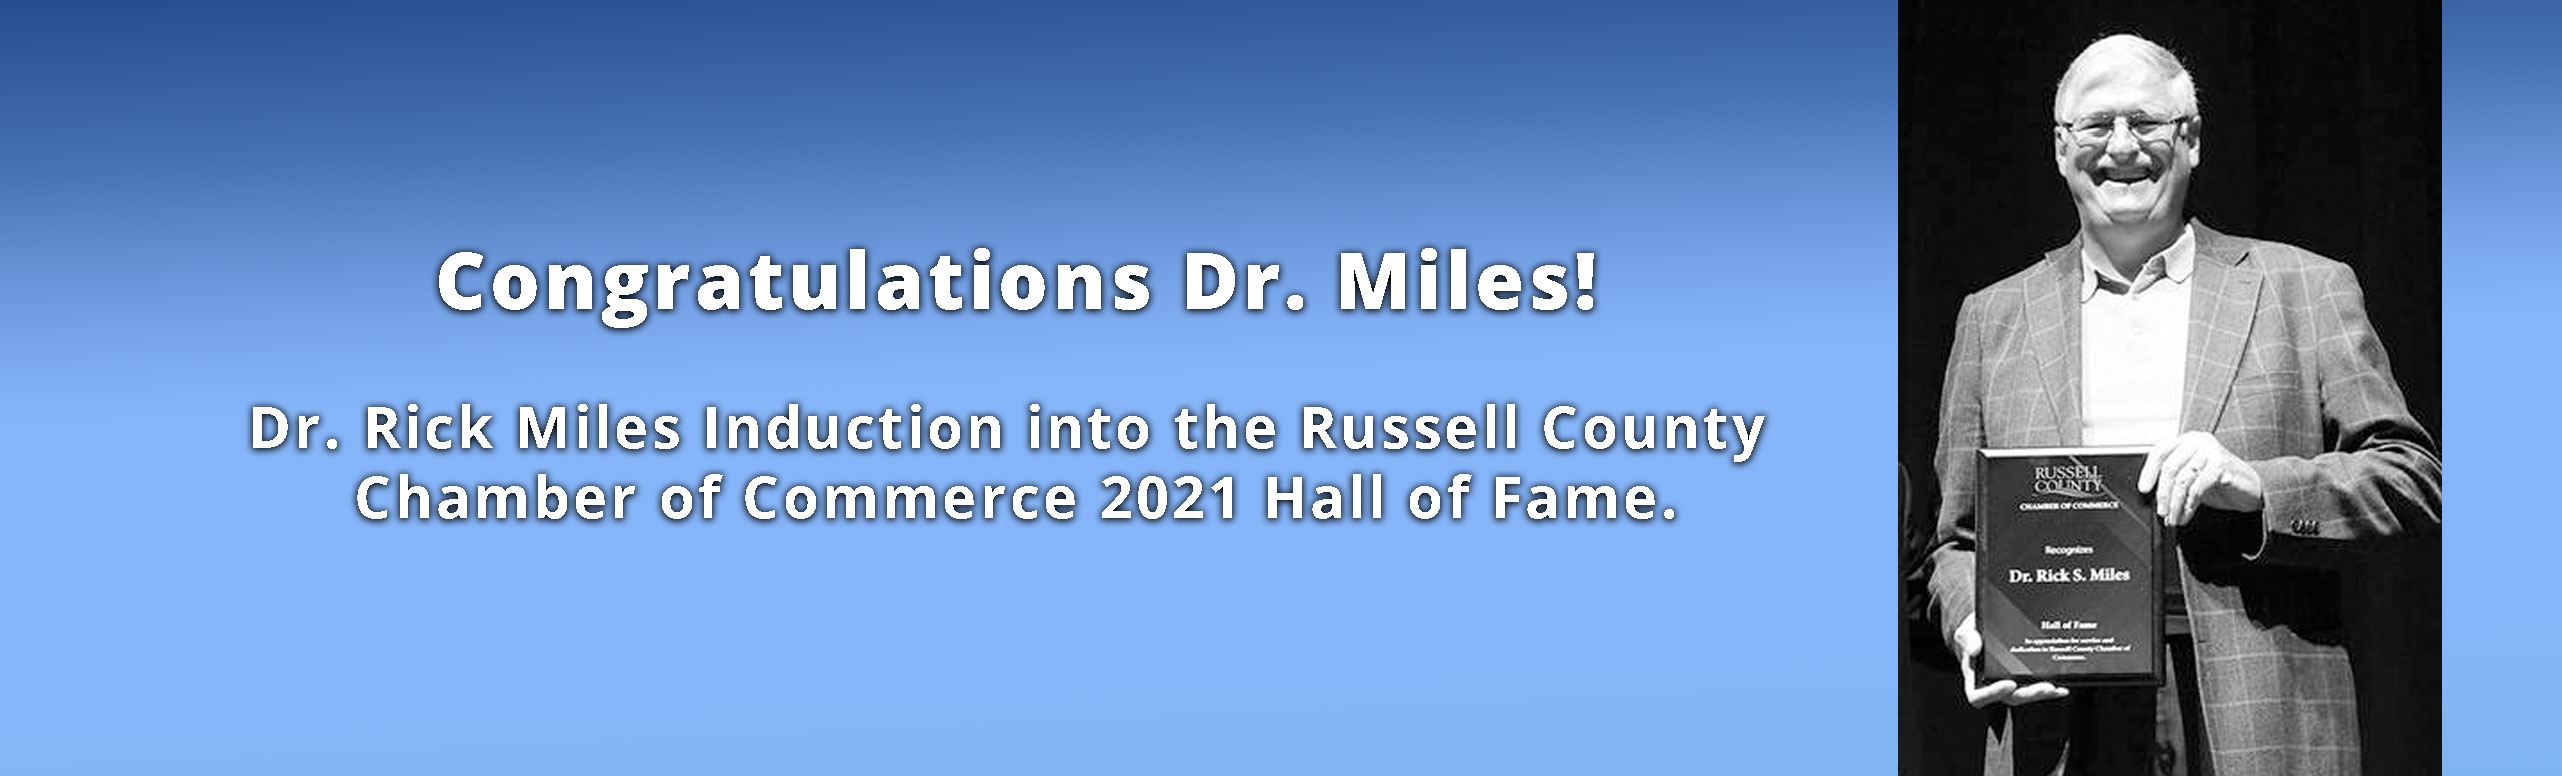 Banner picture of Dr. Miles smiling. Banner says:

Dr. Rick Miles Induction into the Russell County Chamber of Commerce 2021 Hall of Fame.